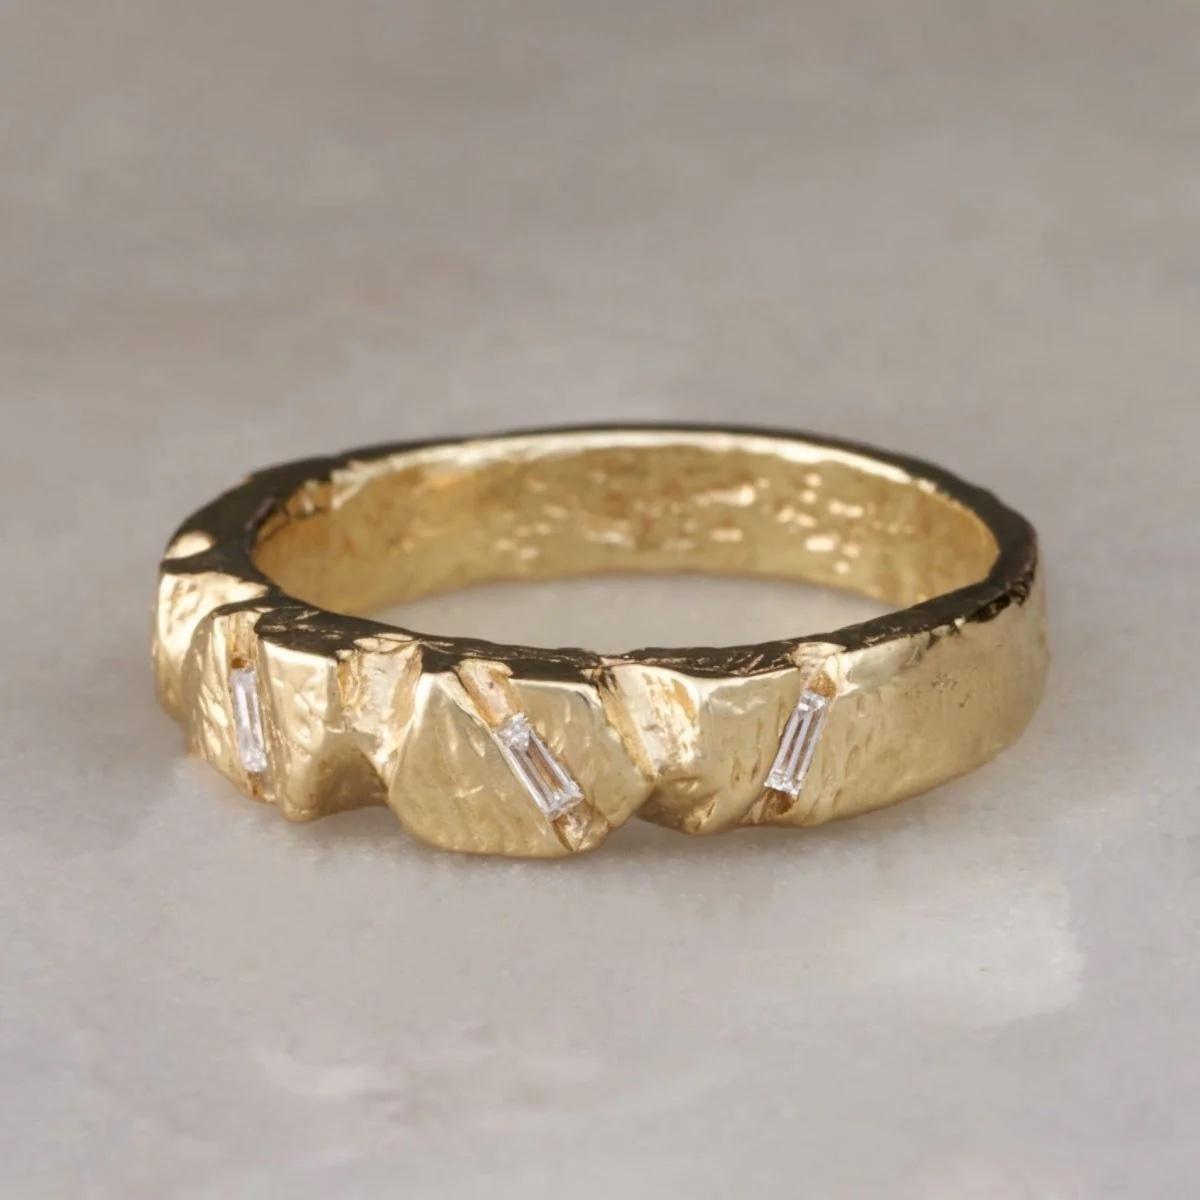 For Sale:  EMBLM Nugget Ring – 14K Yellow Gold, White Diamonds, Organic, Hand Carved 4